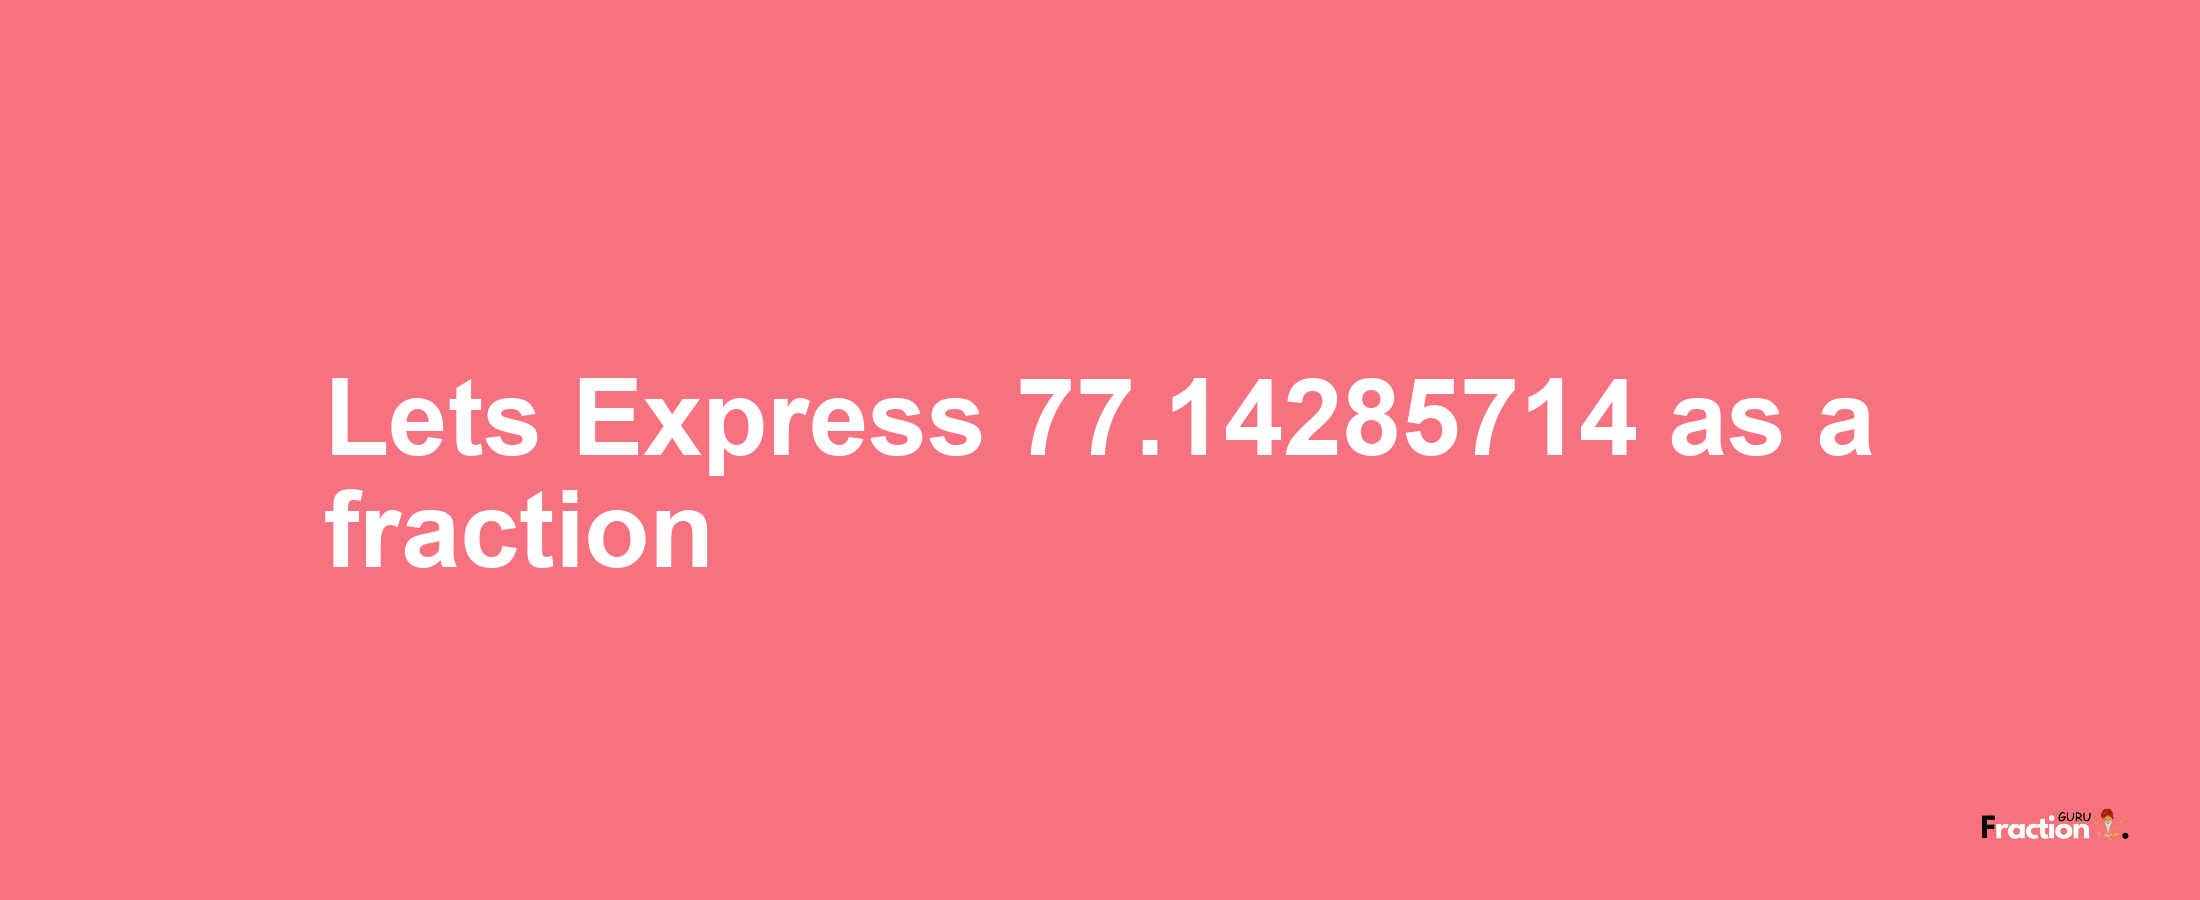 Lets Express 77.14285714 as afraction